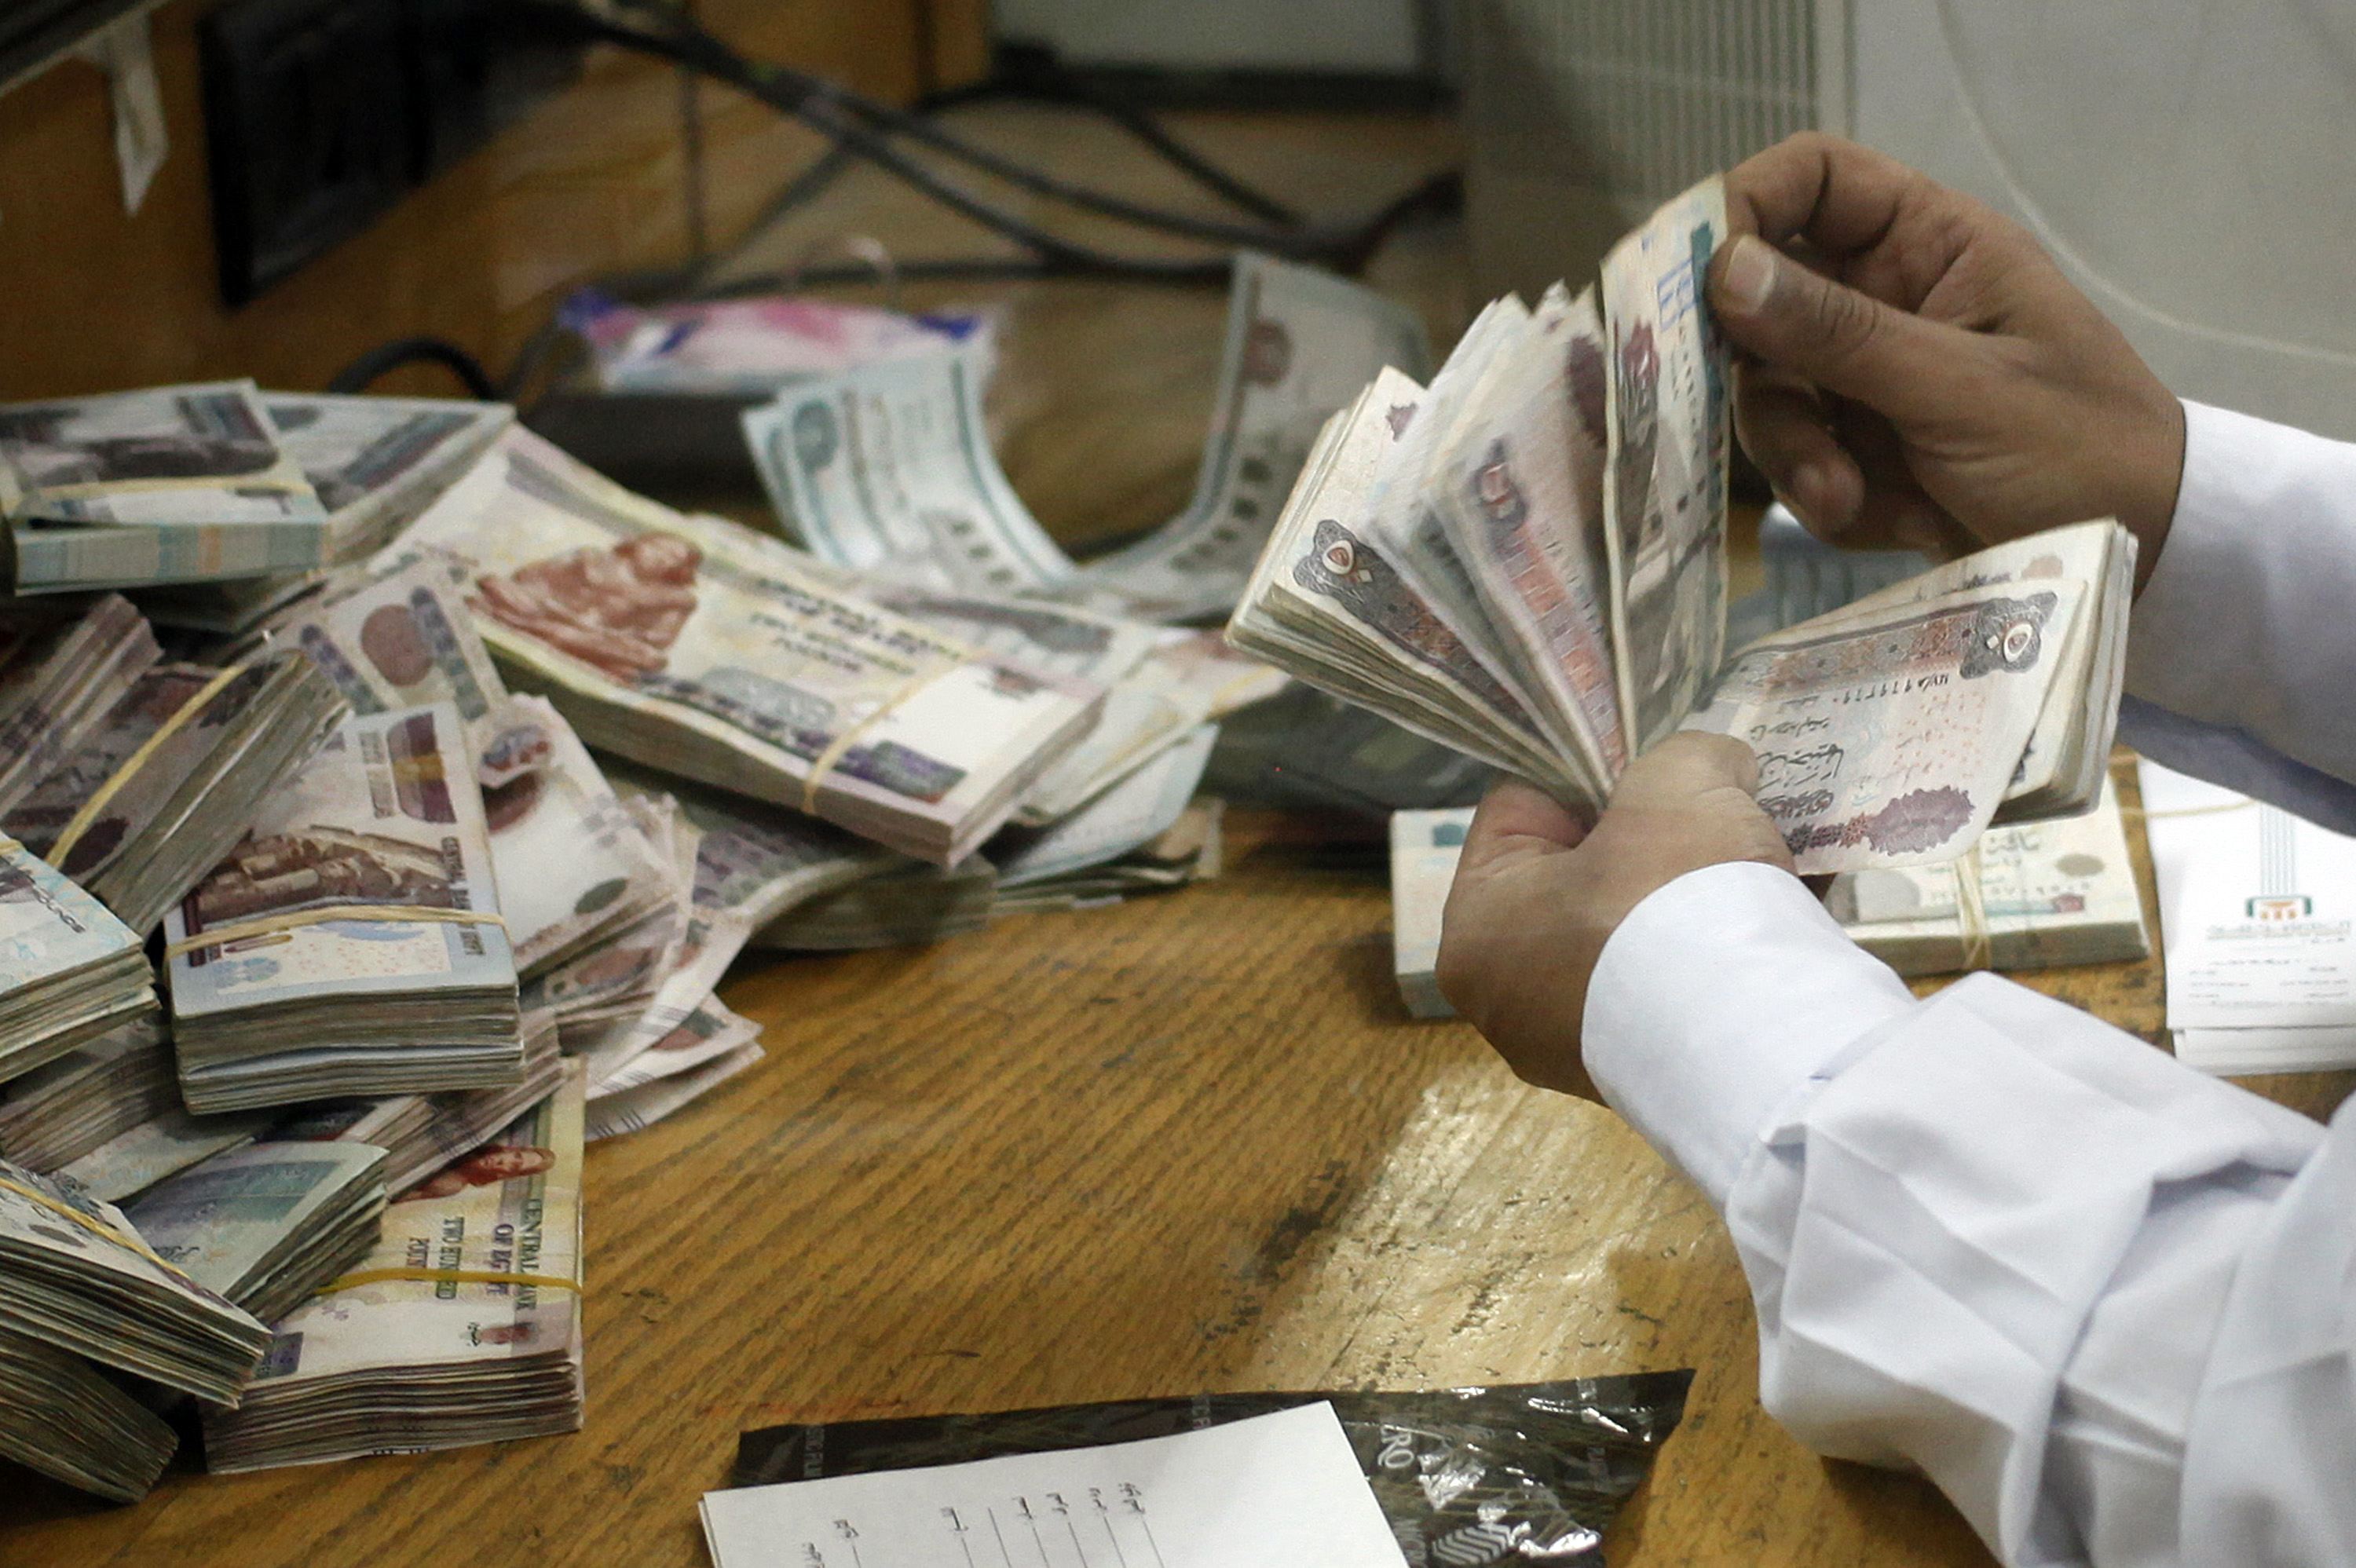 Egypt plans cash benefits in early 2015 to offset subsidy cuts - minister